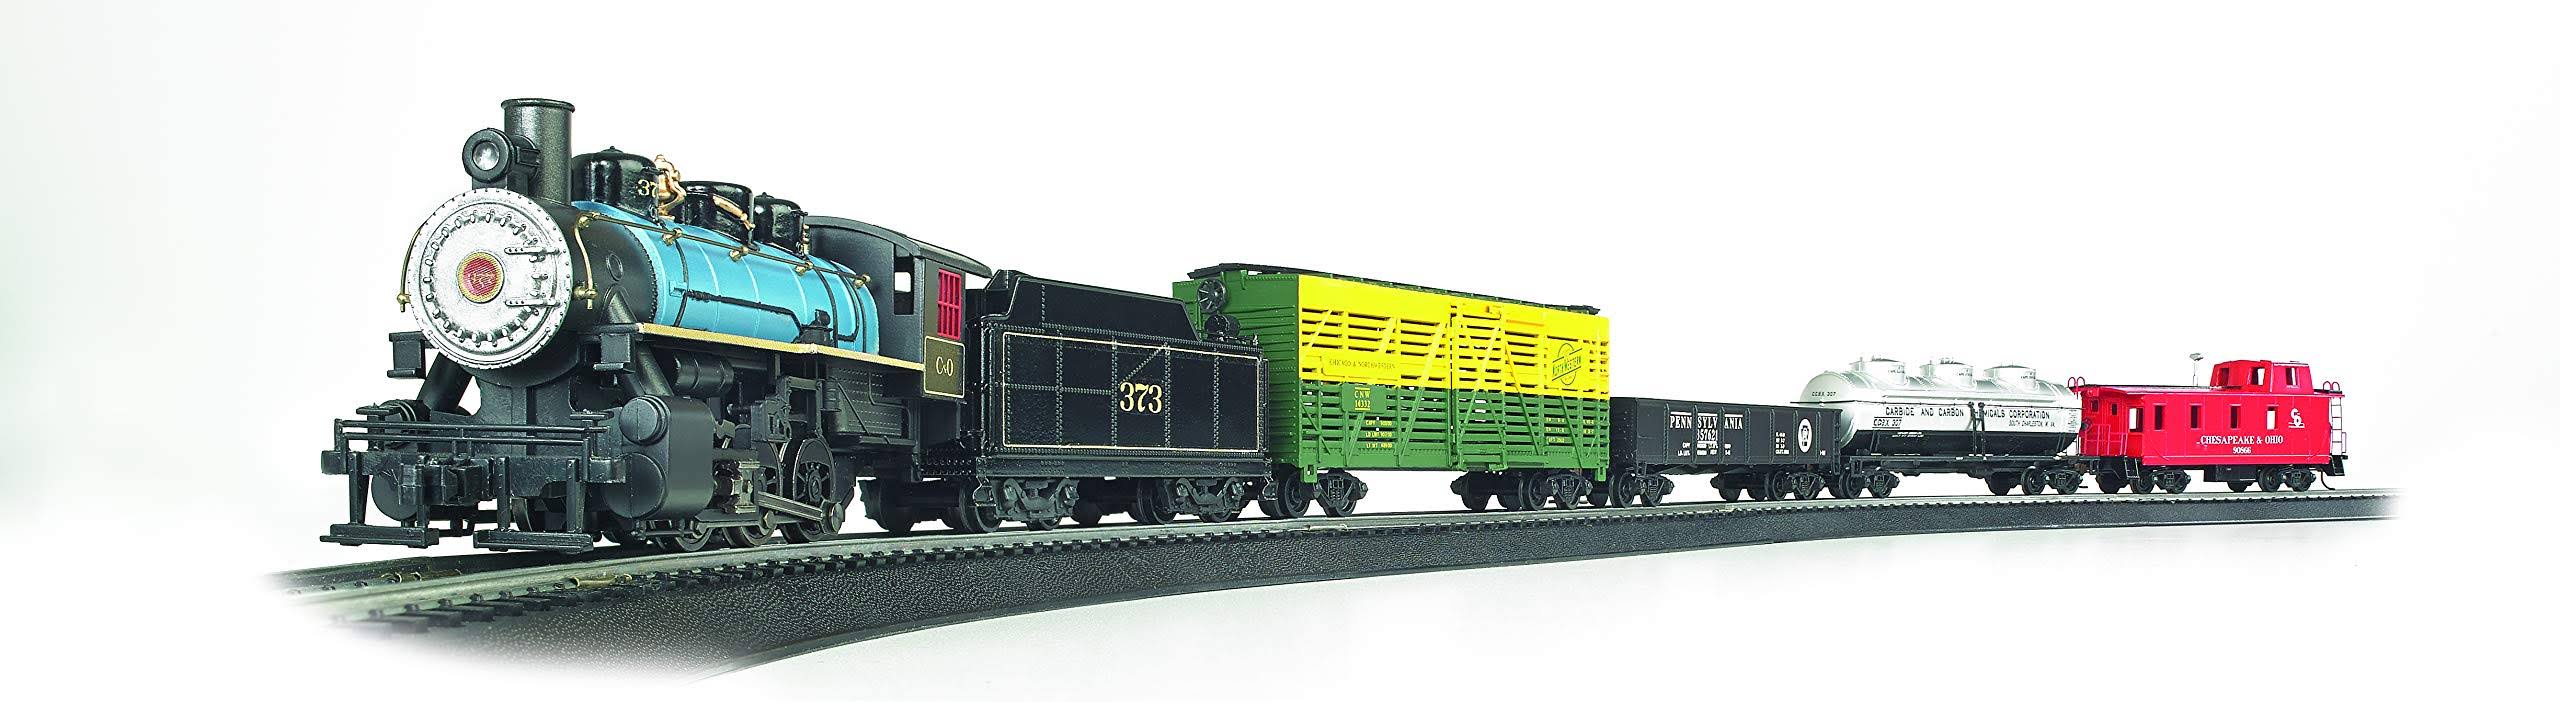 Bachmann Trains Chessie Special Ready To Run Electric Train Model Toy Set